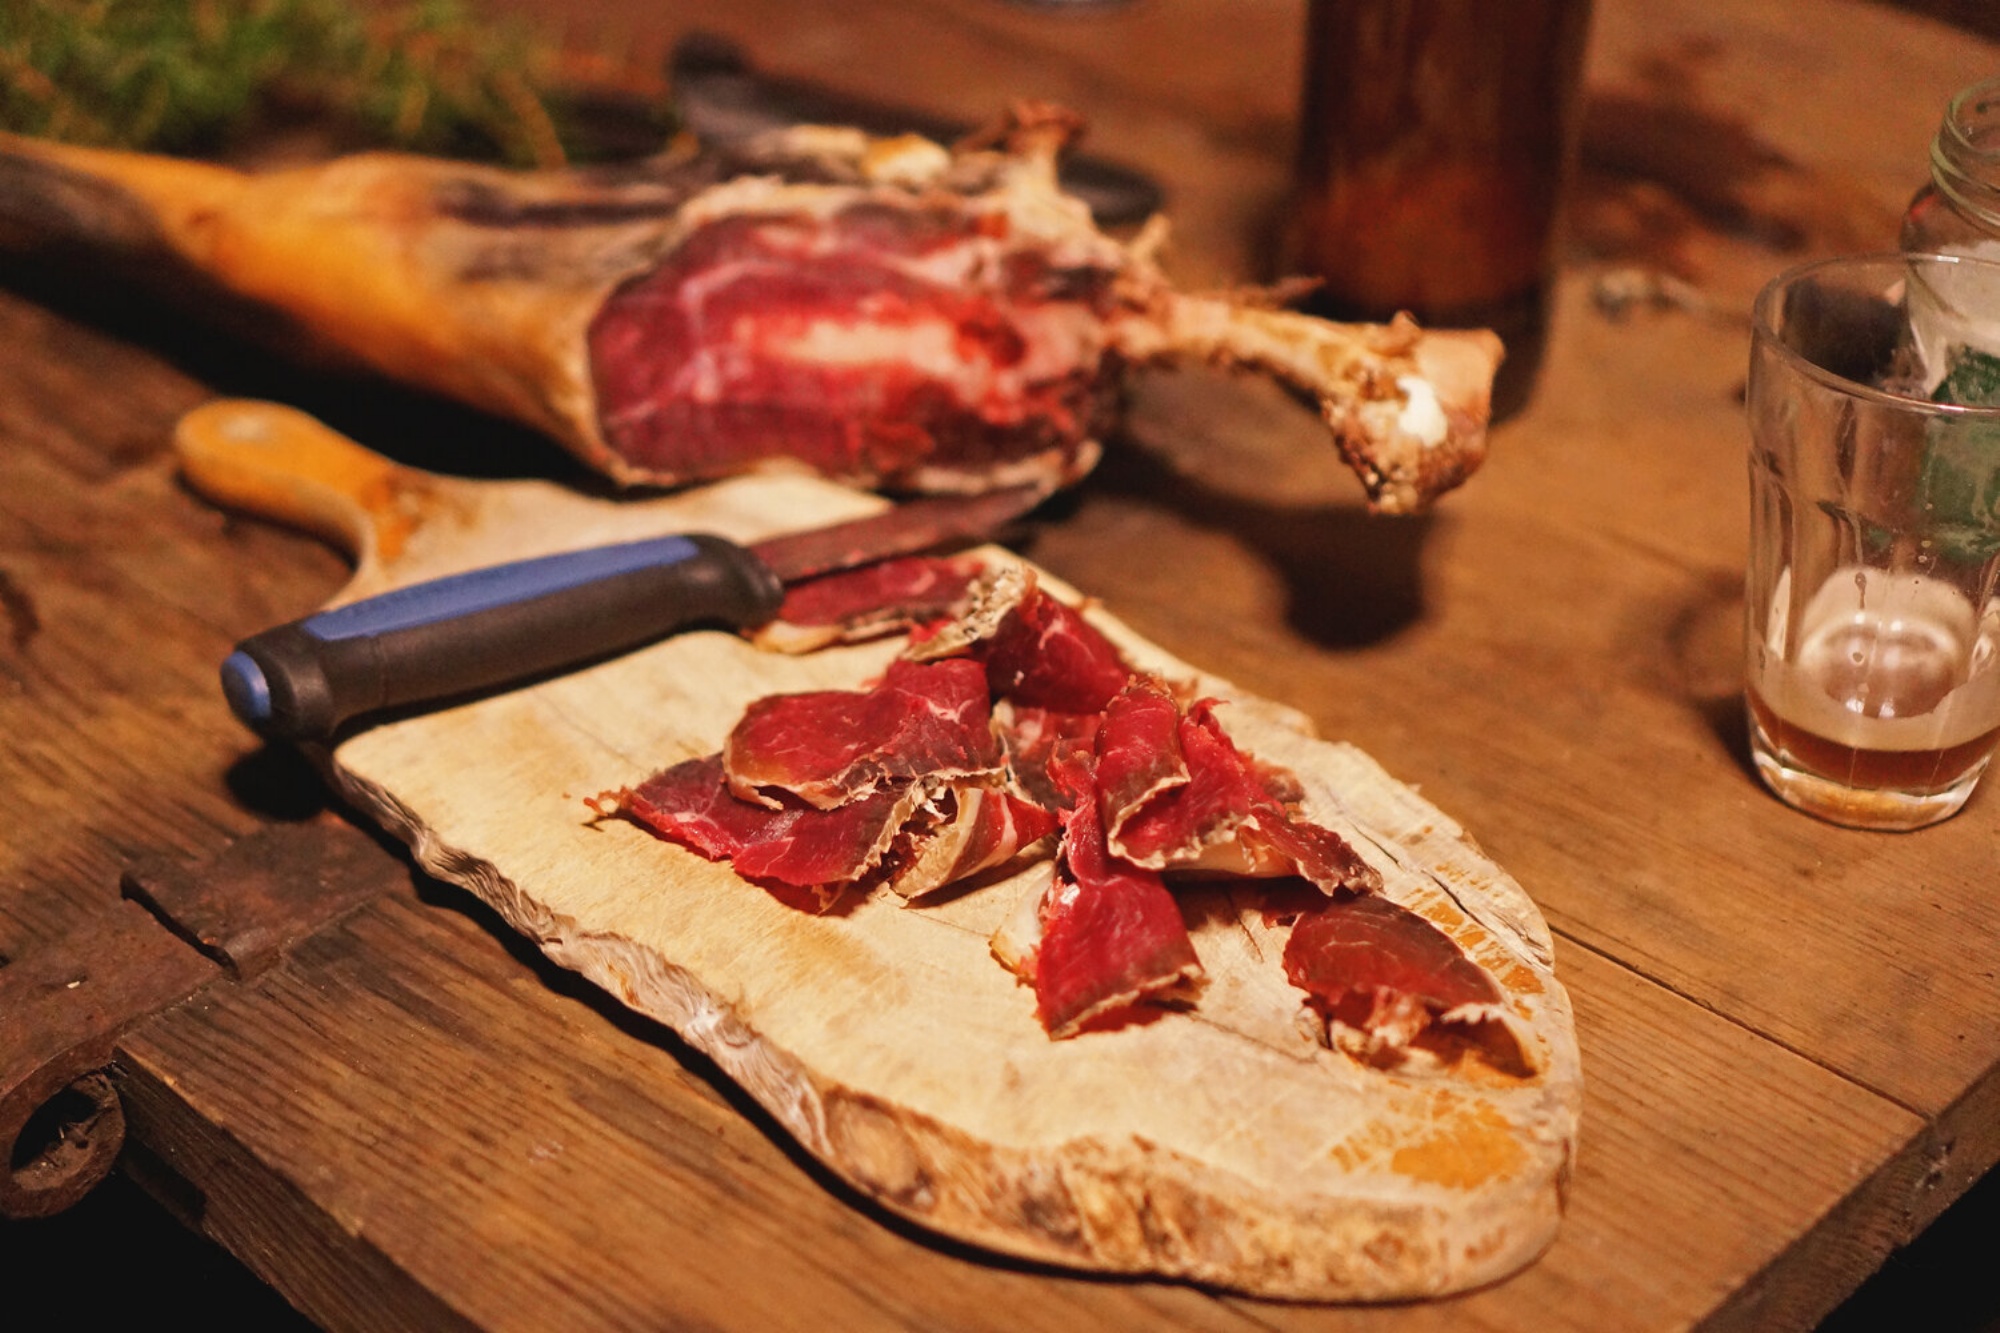 Tasty smoked and cured meat of lambPhoto: Claire Bullen